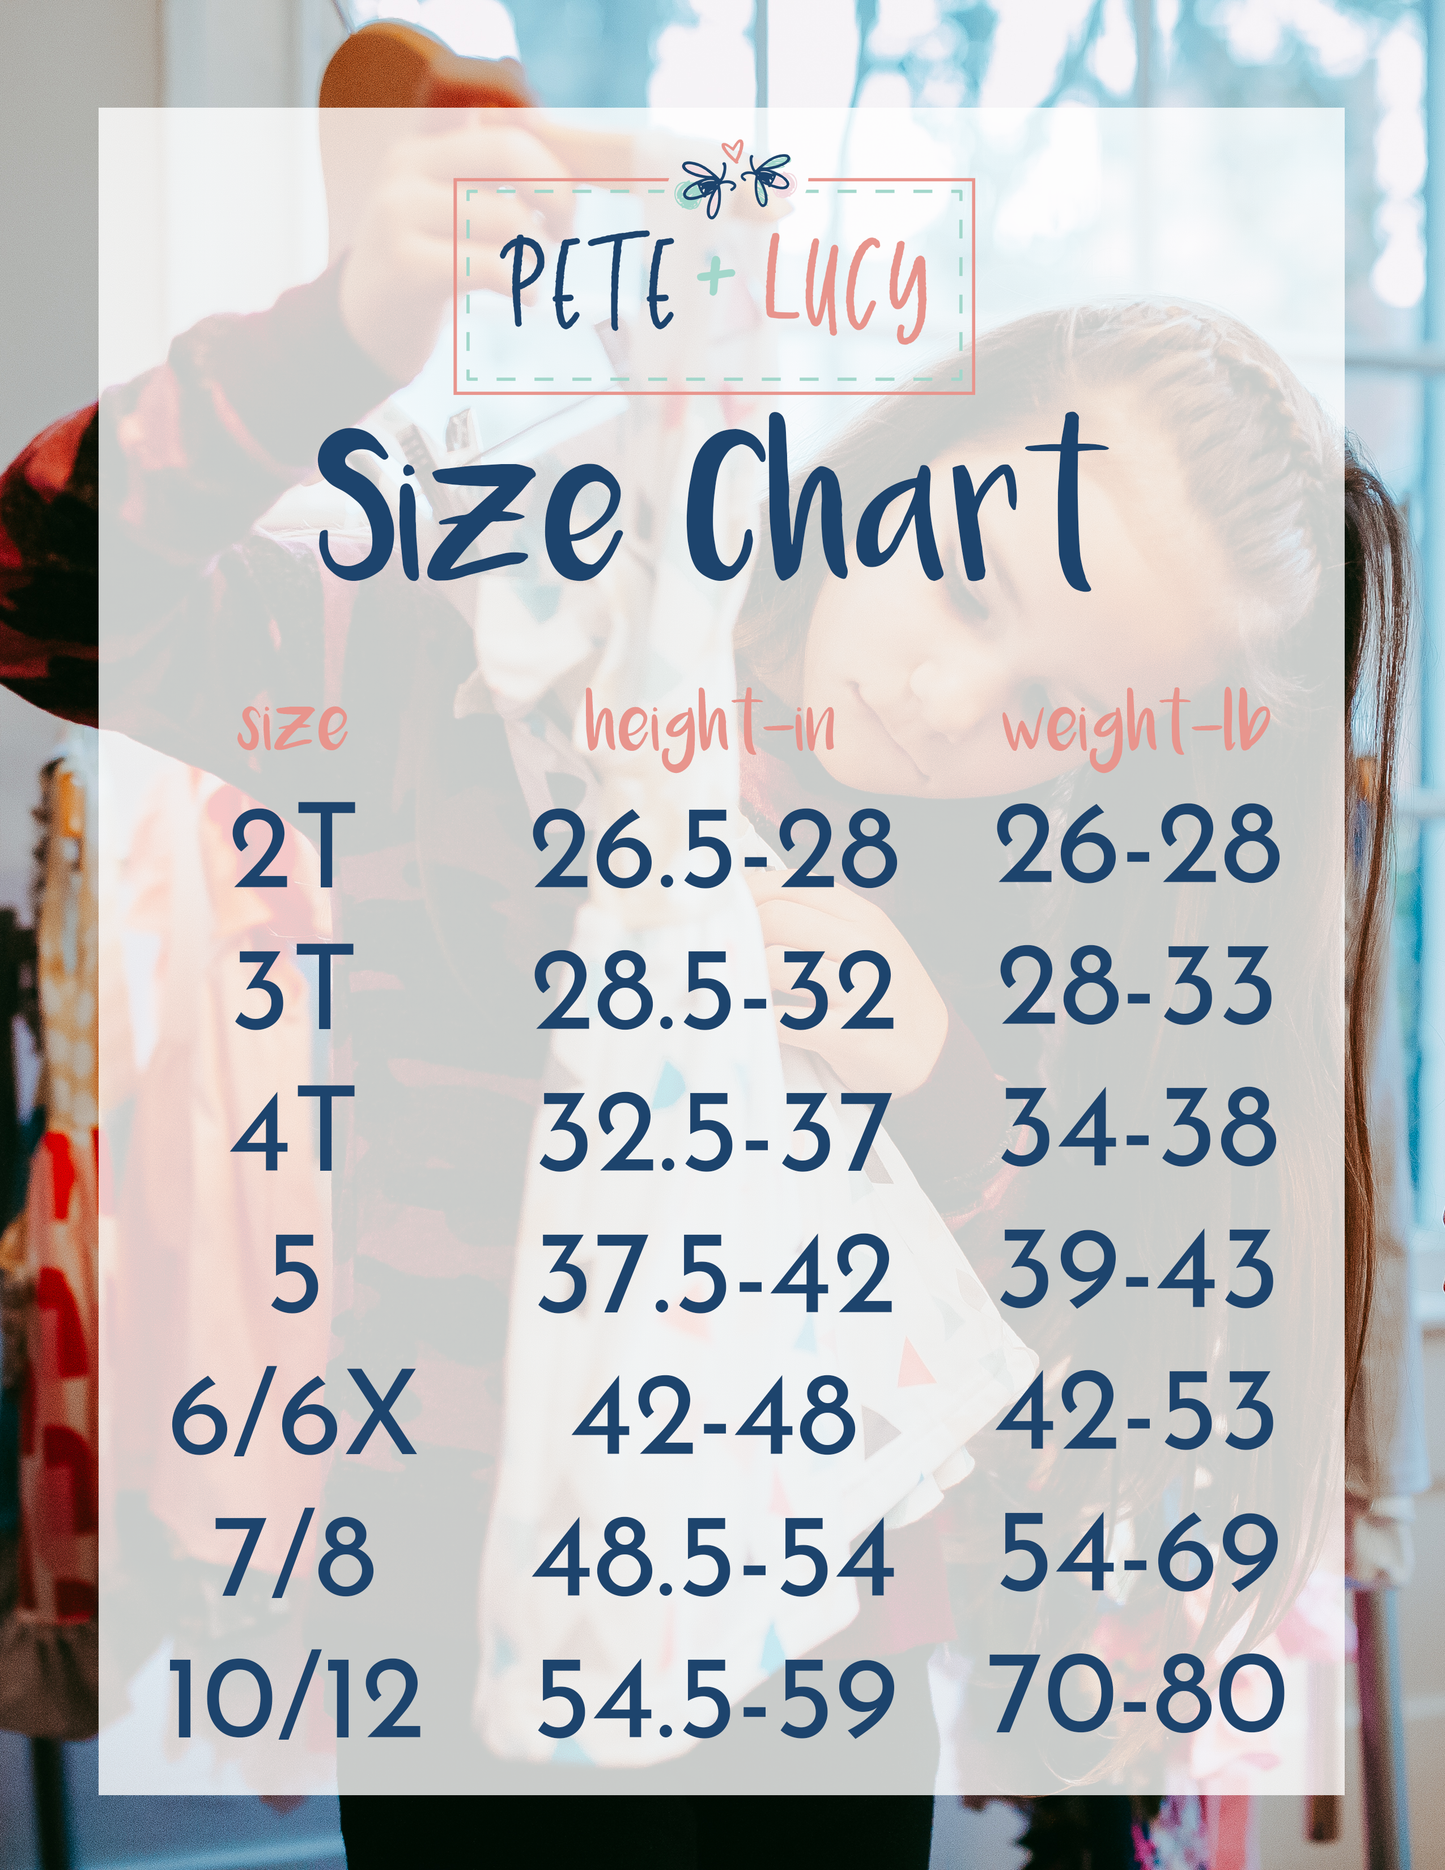 (Preorder) Let Your Hair Down Dress by Pete + Lucy